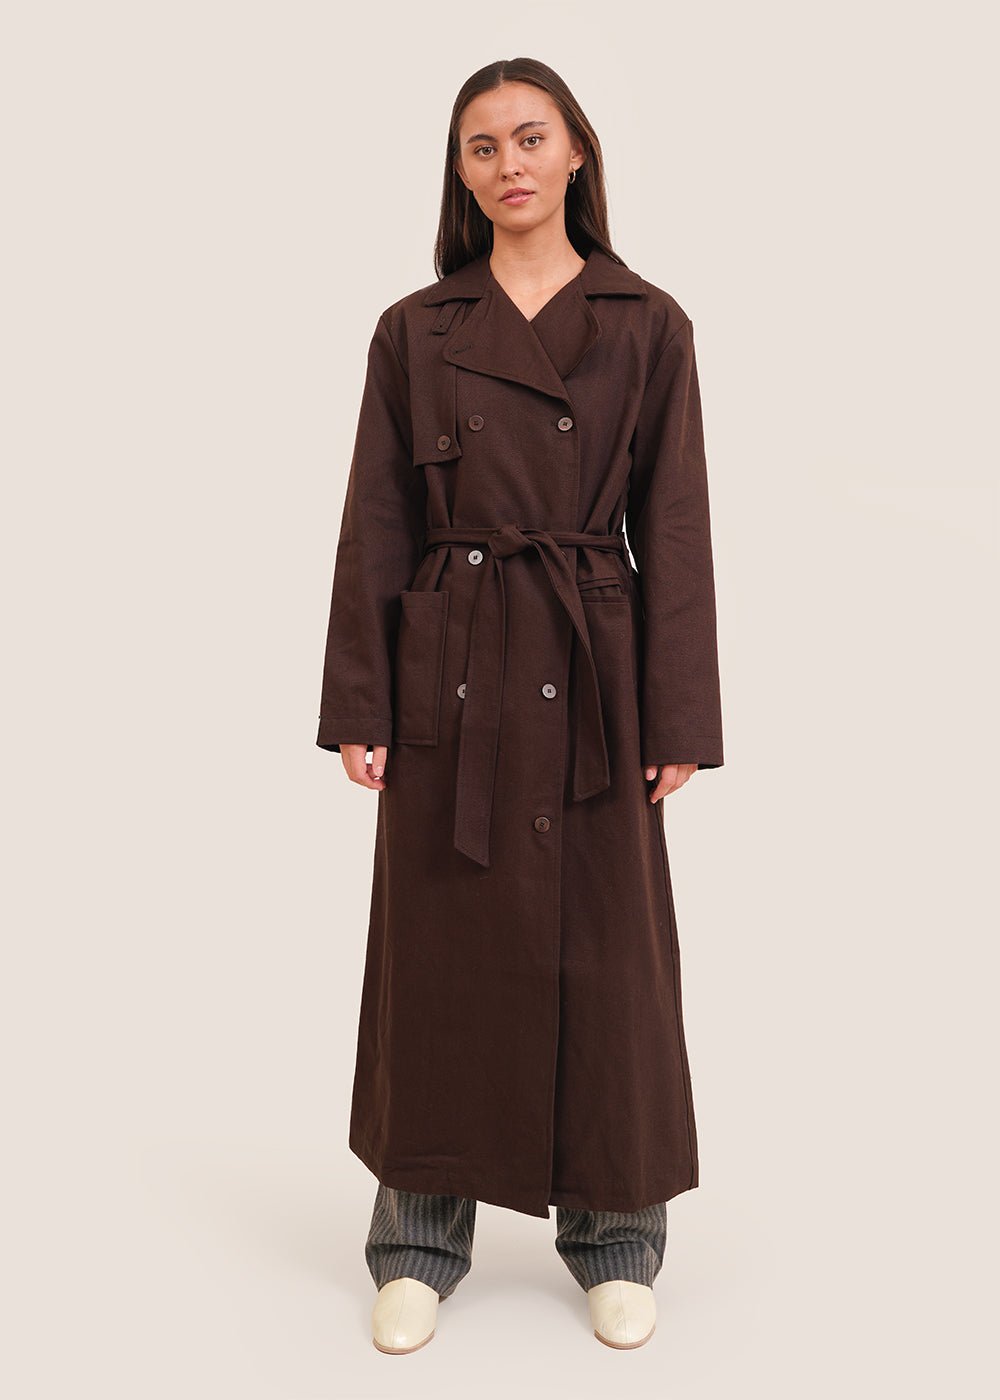 Paloma Wool Brown Pauvet Jacket - New Classics Studios Sustainable Ethical Fashion Canada